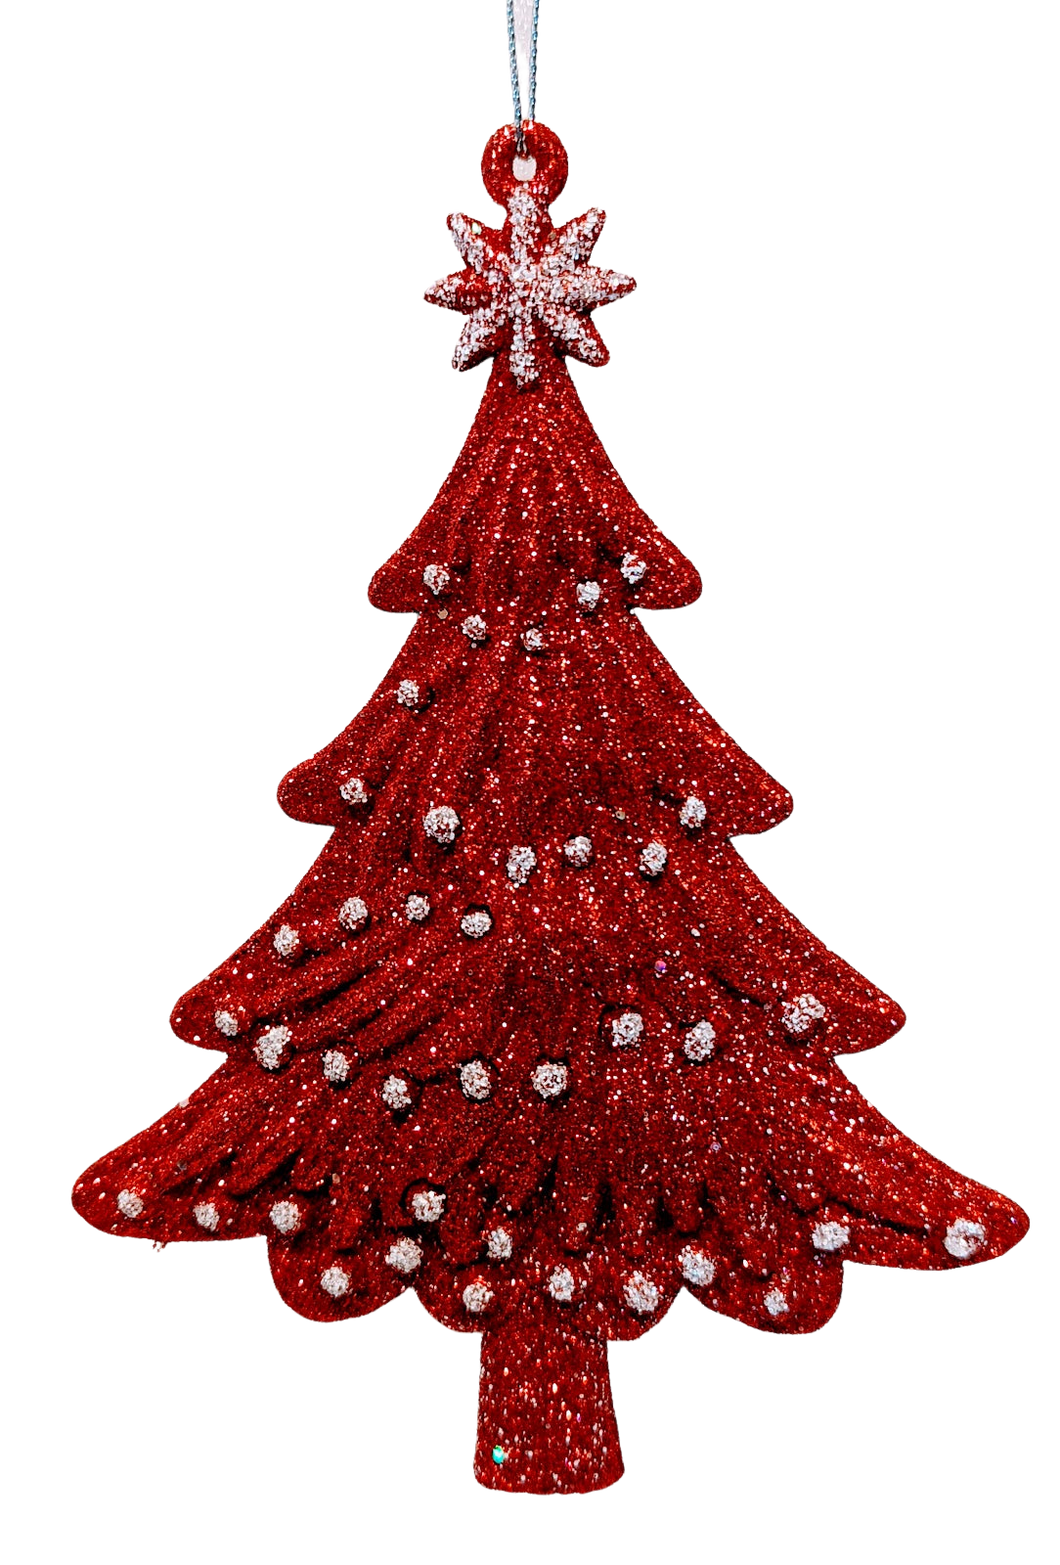 Red and White Glittered Tree Ornaments with Snow Assortment